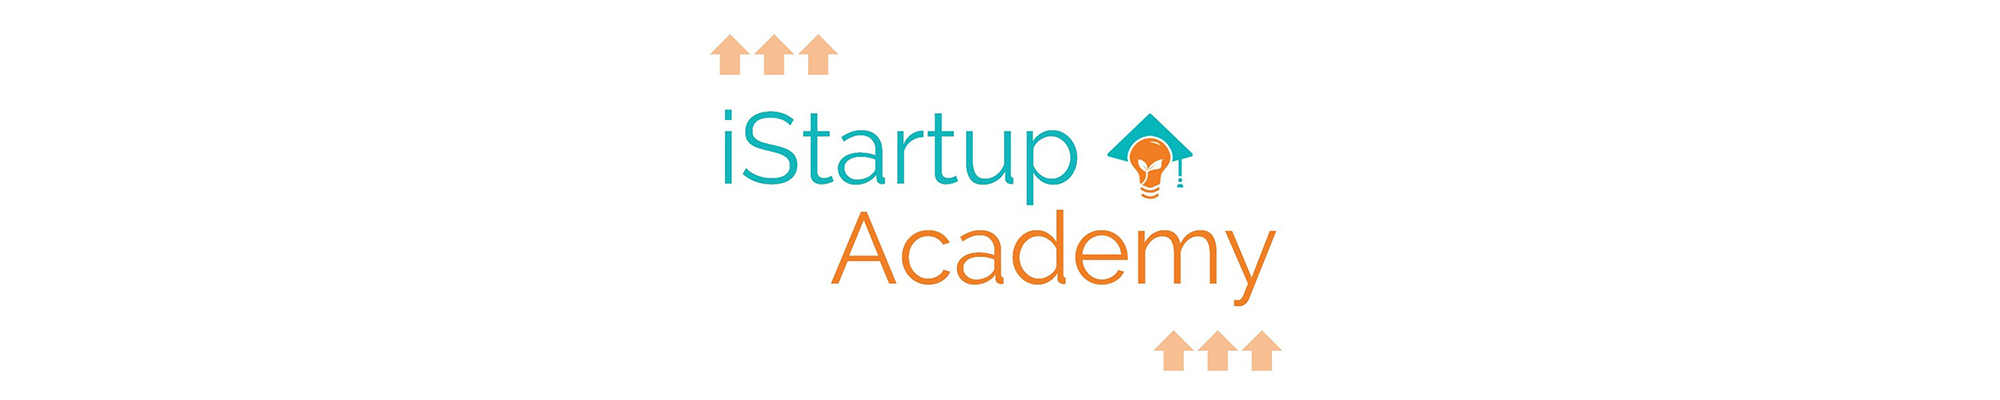 Banner for iStartup Academy 